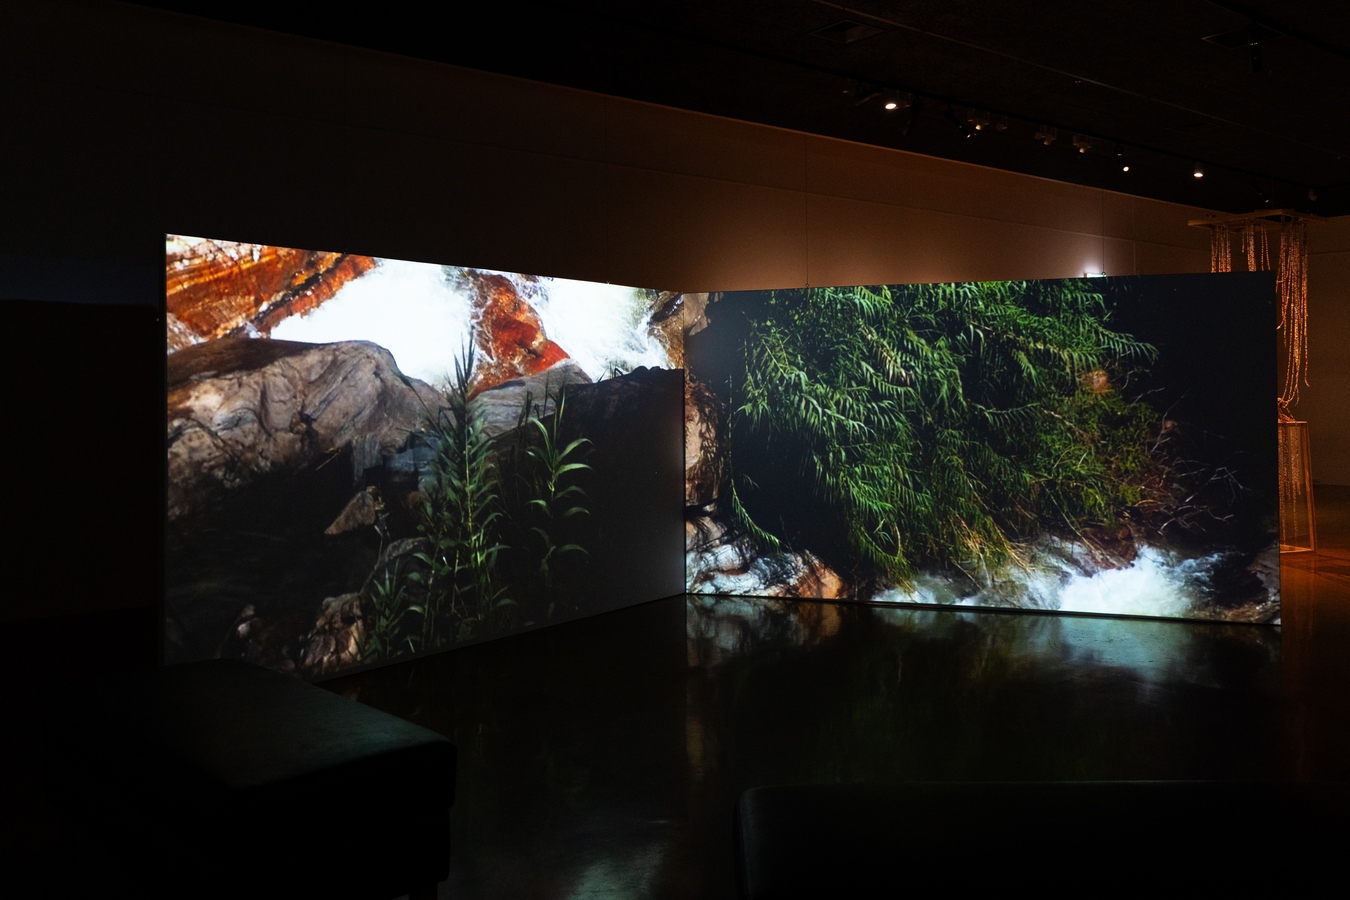 Image: Dilohana Lekamge, A Different Ocean (installation view), 2021. Two-channel video and sound. 5'01". Photo by Rosa Nevison.